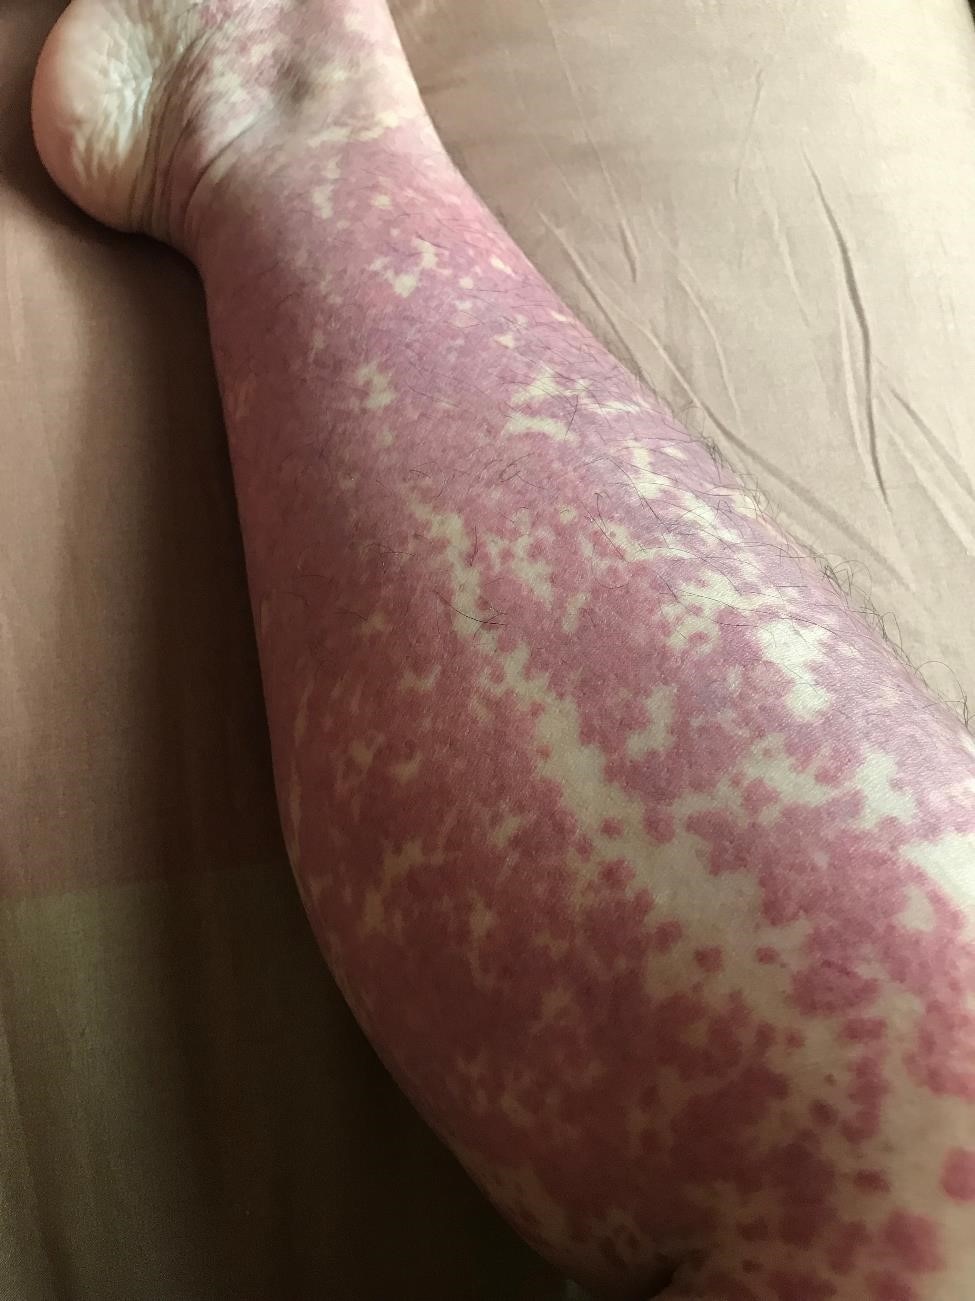 Lower leg nearly covered in a purple rash.